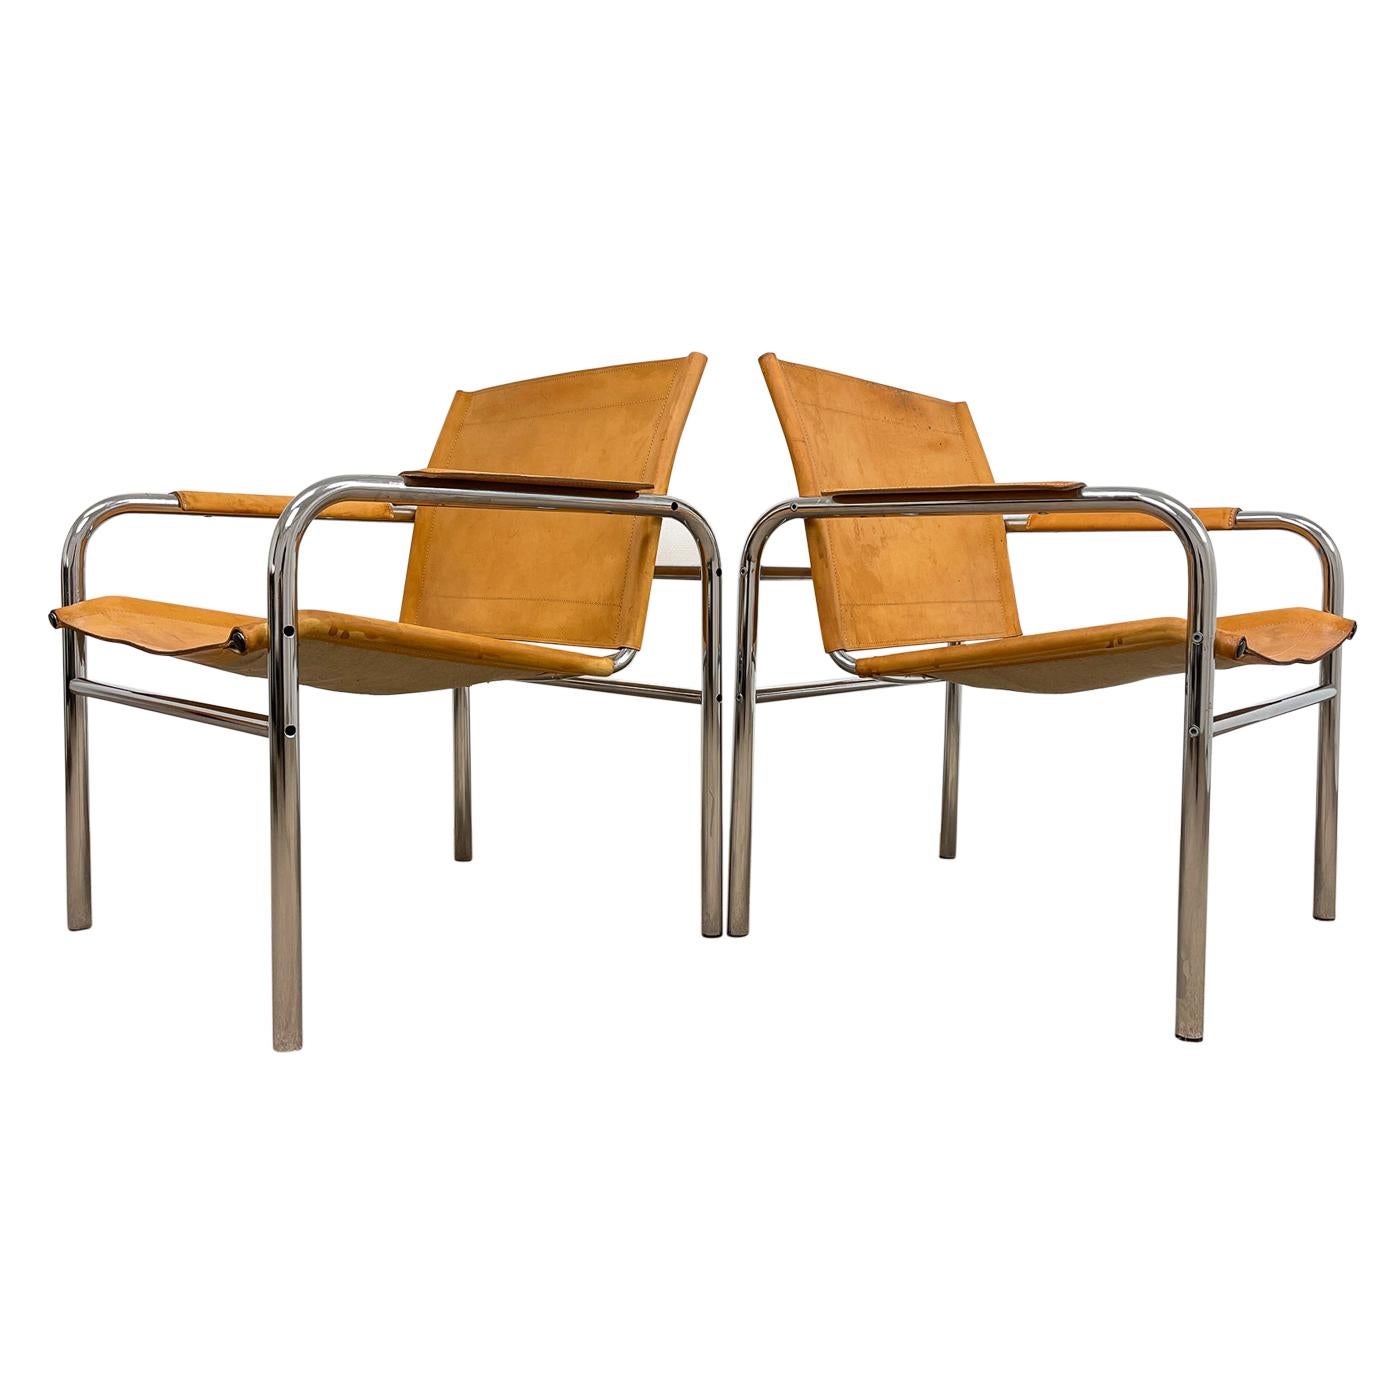 Pair of Leather and Tubular Steel Armchairs by Tord Bjorklund, Sweden, 1980s